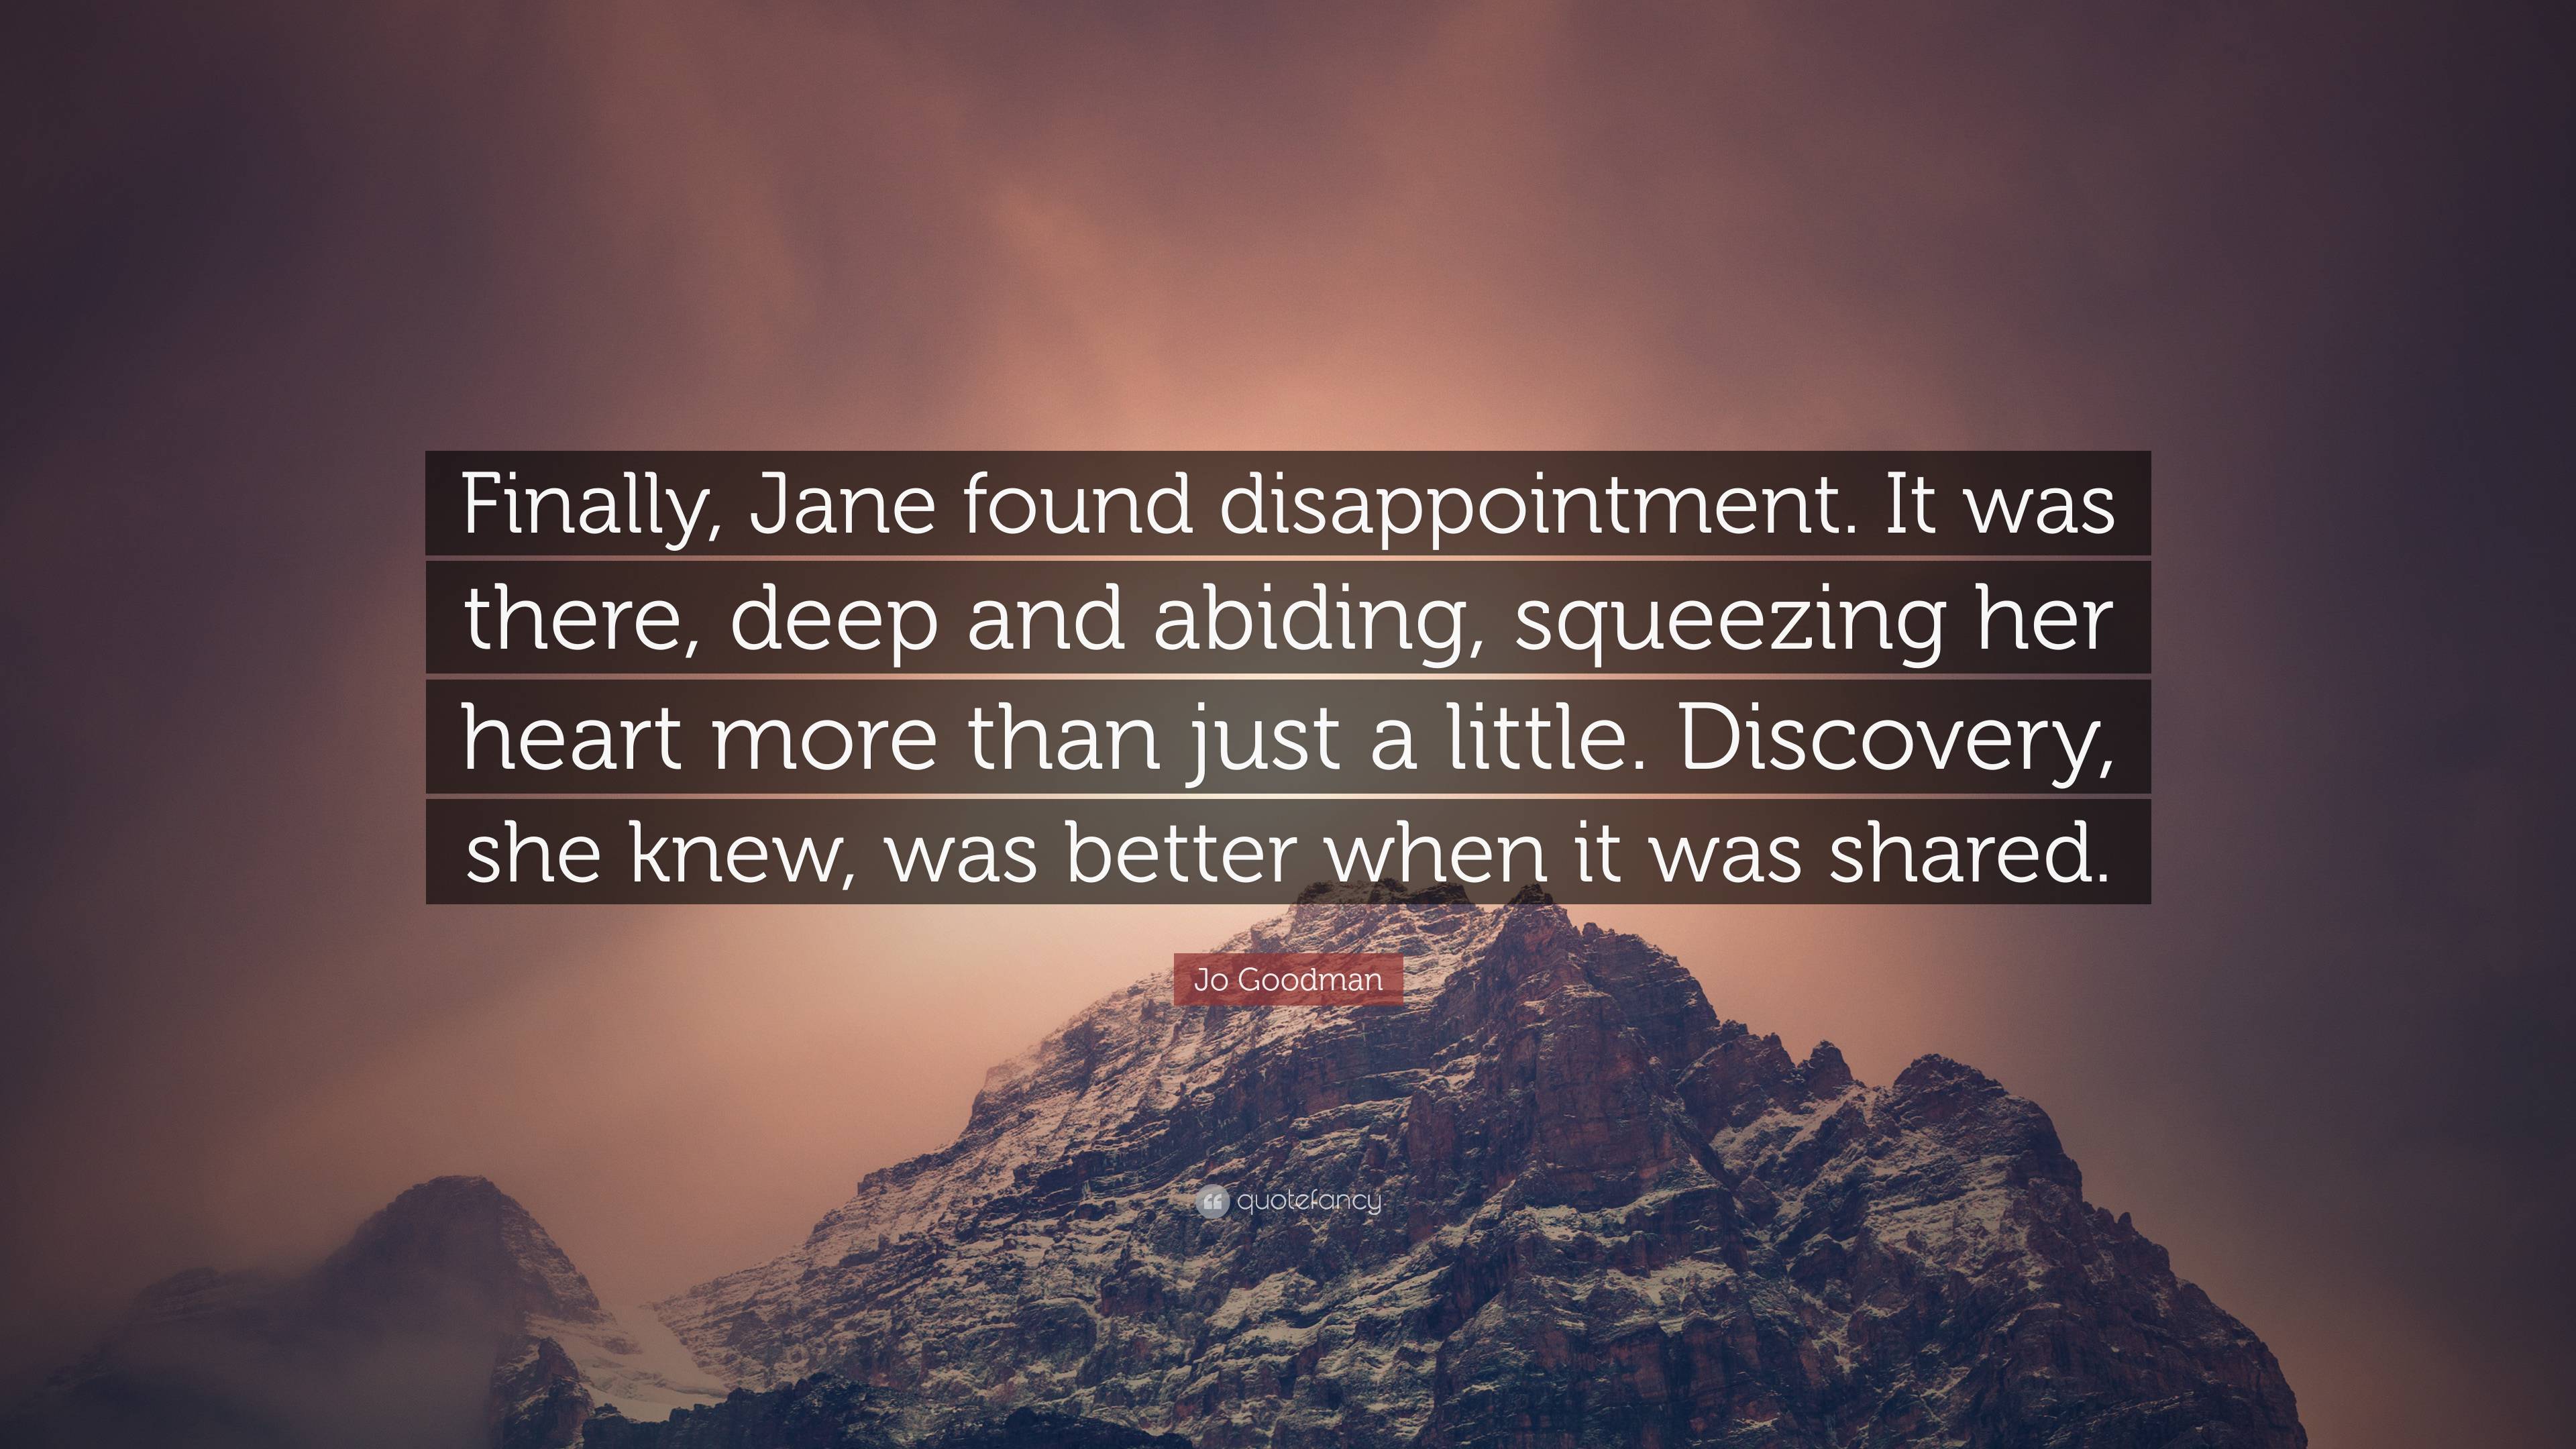 Jo Goodman Quote: “Finally, Jane found disappointment. It was